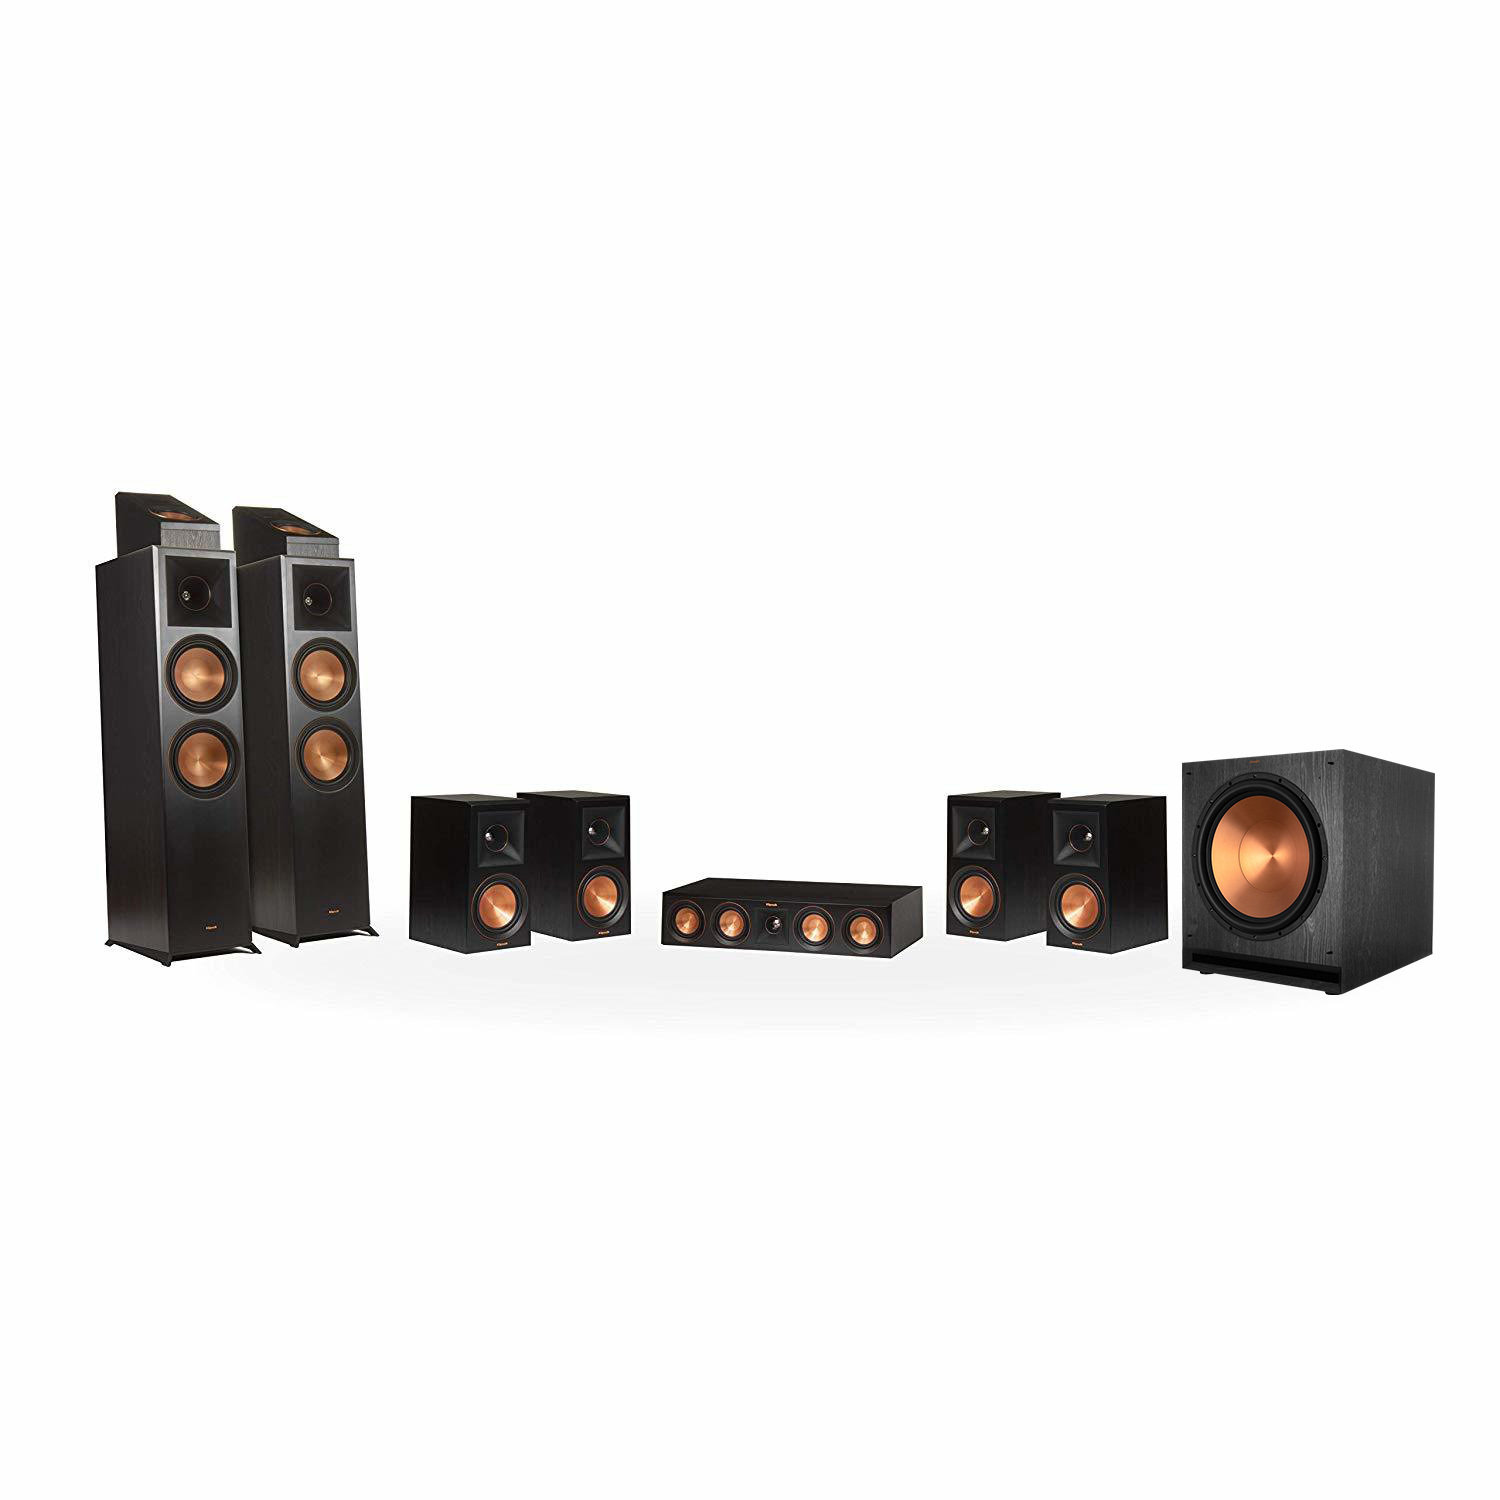 RP-8000F 7.1.2 Dolby Atmos® Home Theater System | Klipsch